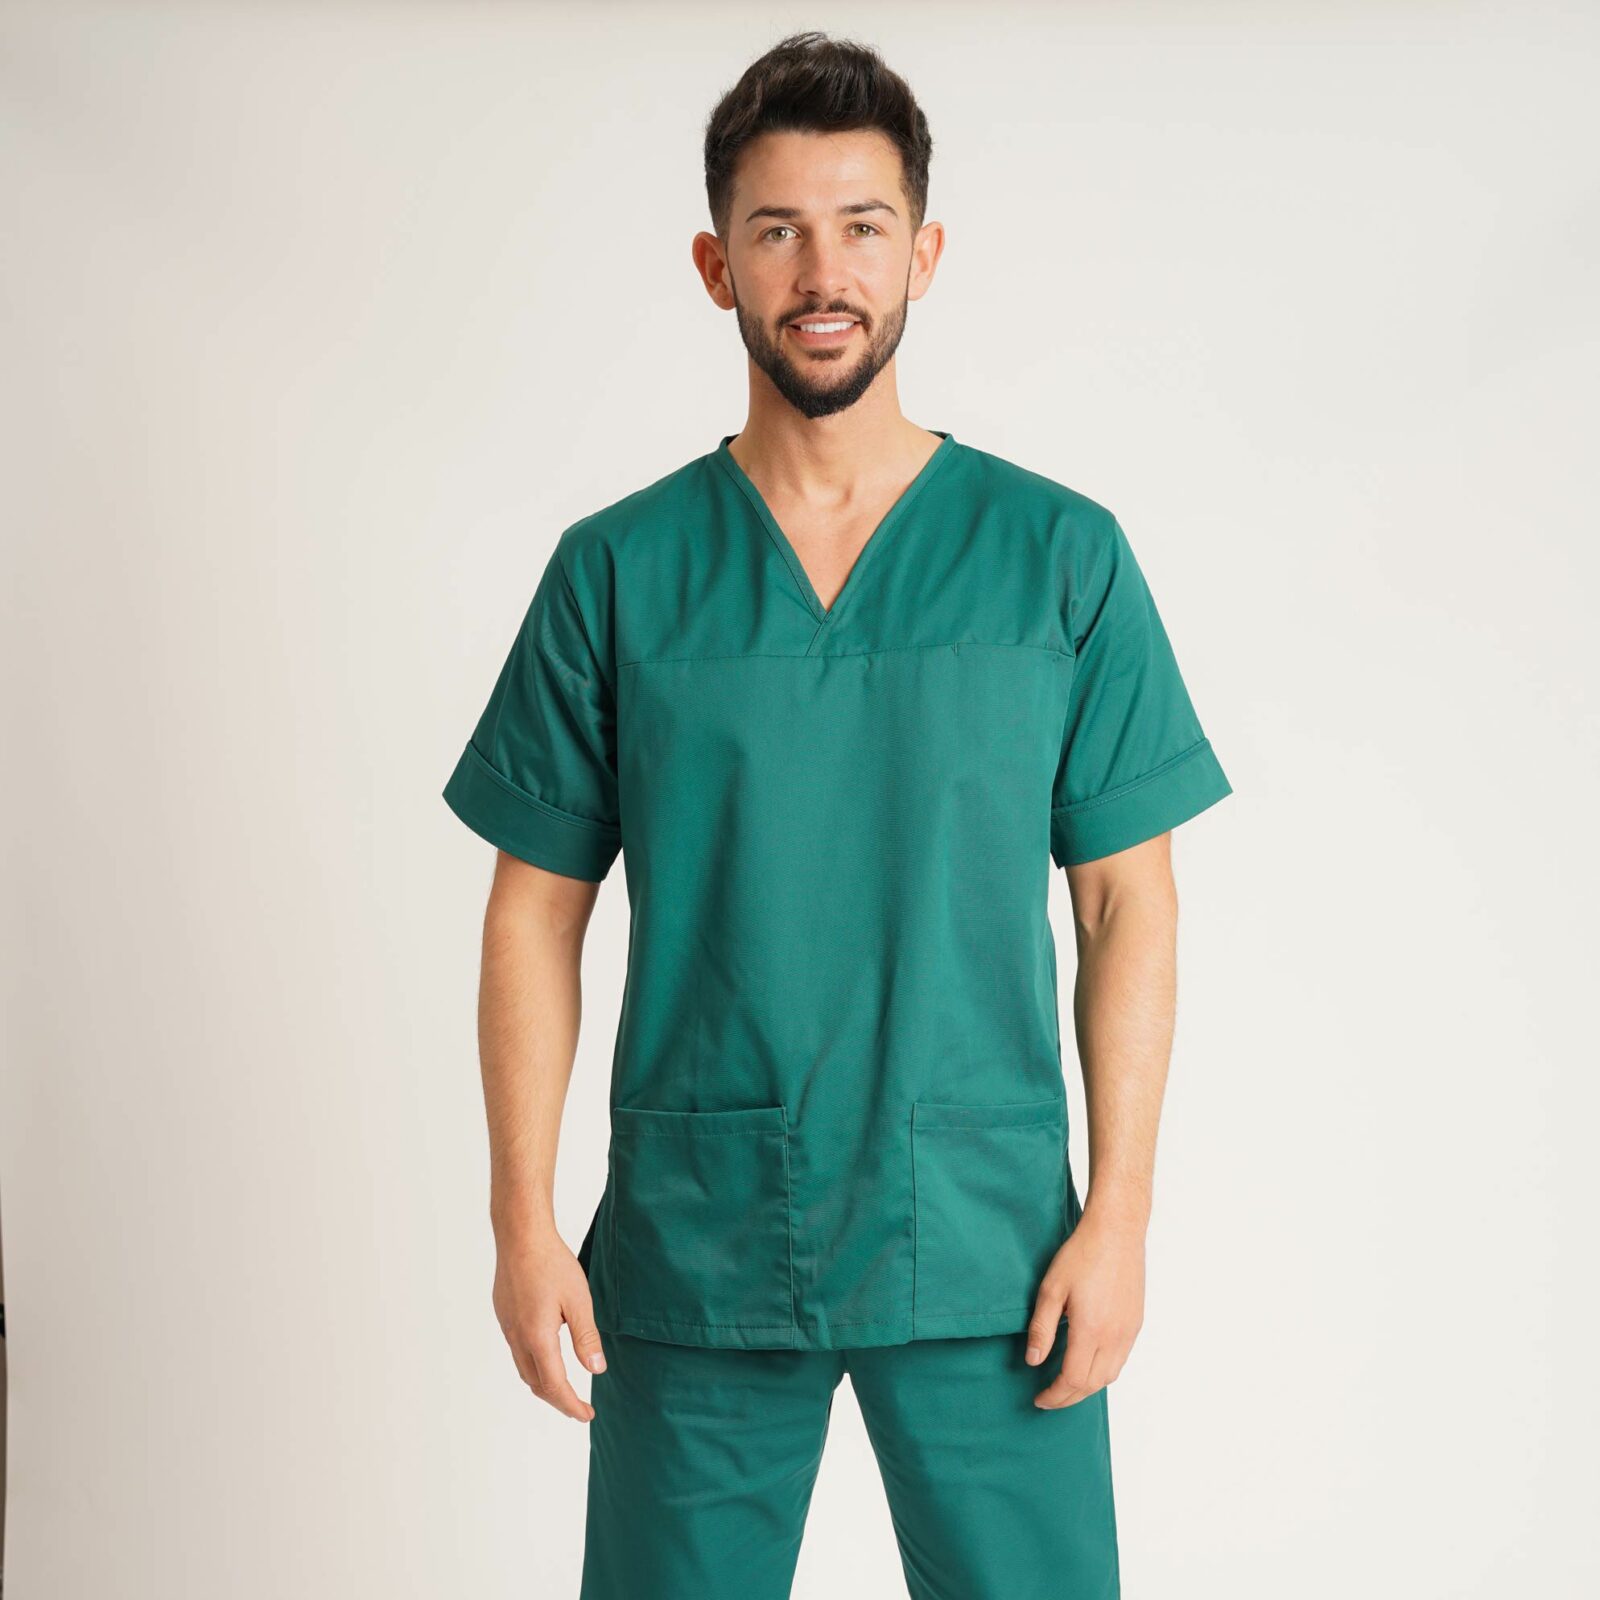 Smart Scrub Top - Unisex - Cleaners Uniforms, Housekeeping & Cleaning ...